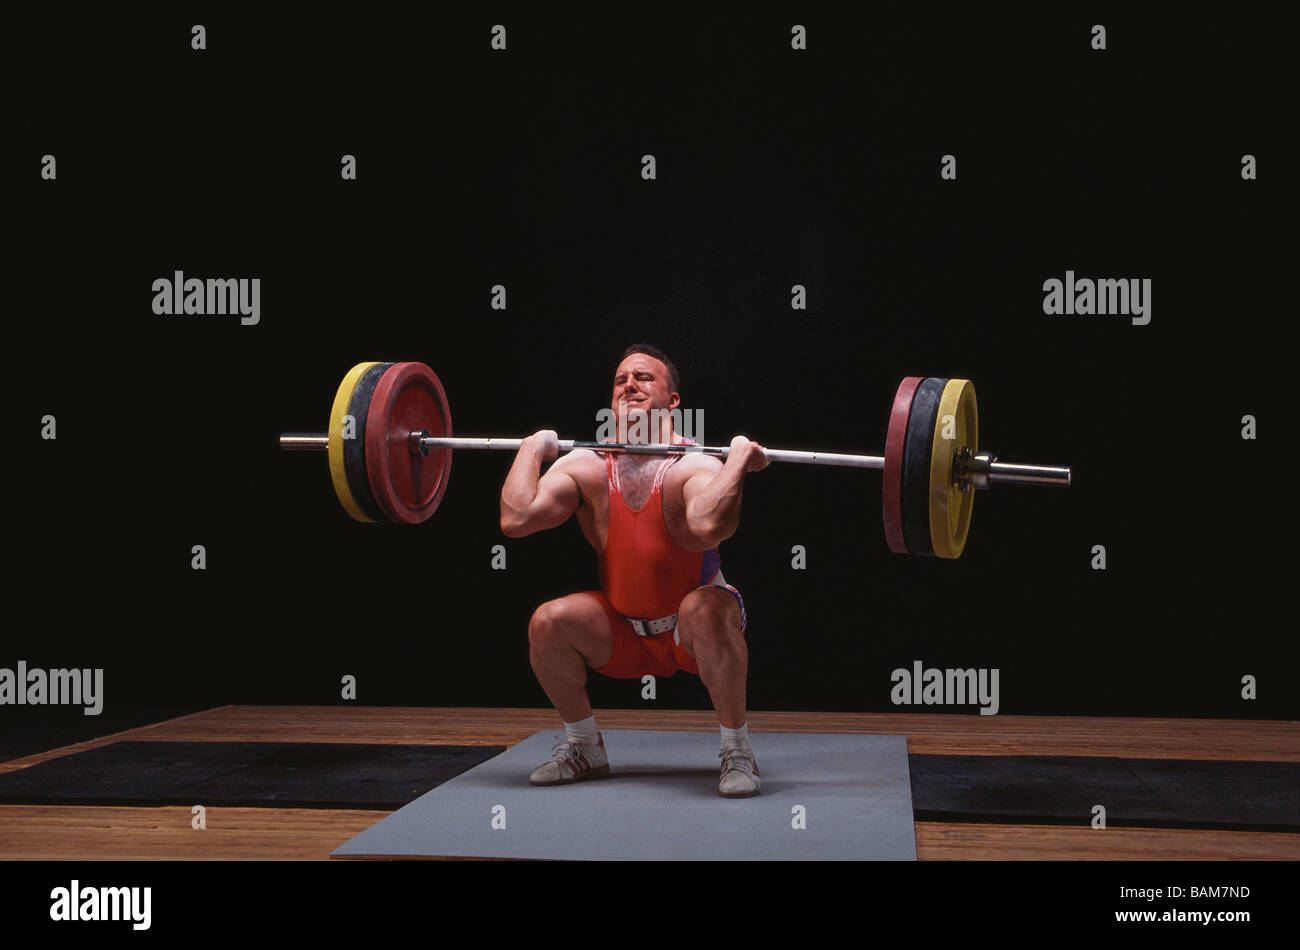 Olympic style weightlifter in action Stock Photo